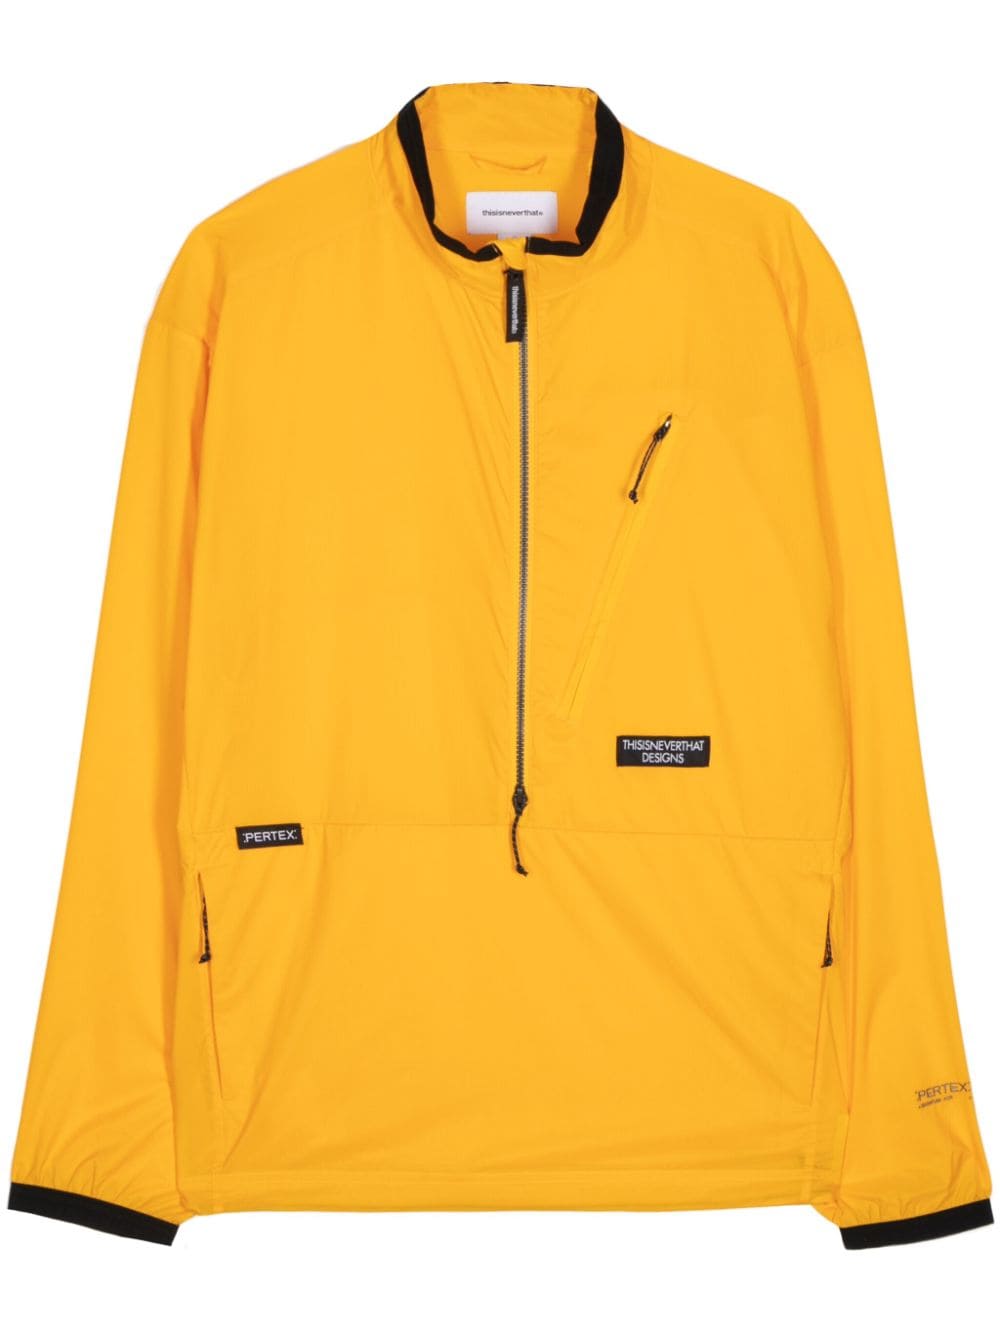 This Is Never That Pertex® Half-zip Performance Jacket In Yellow